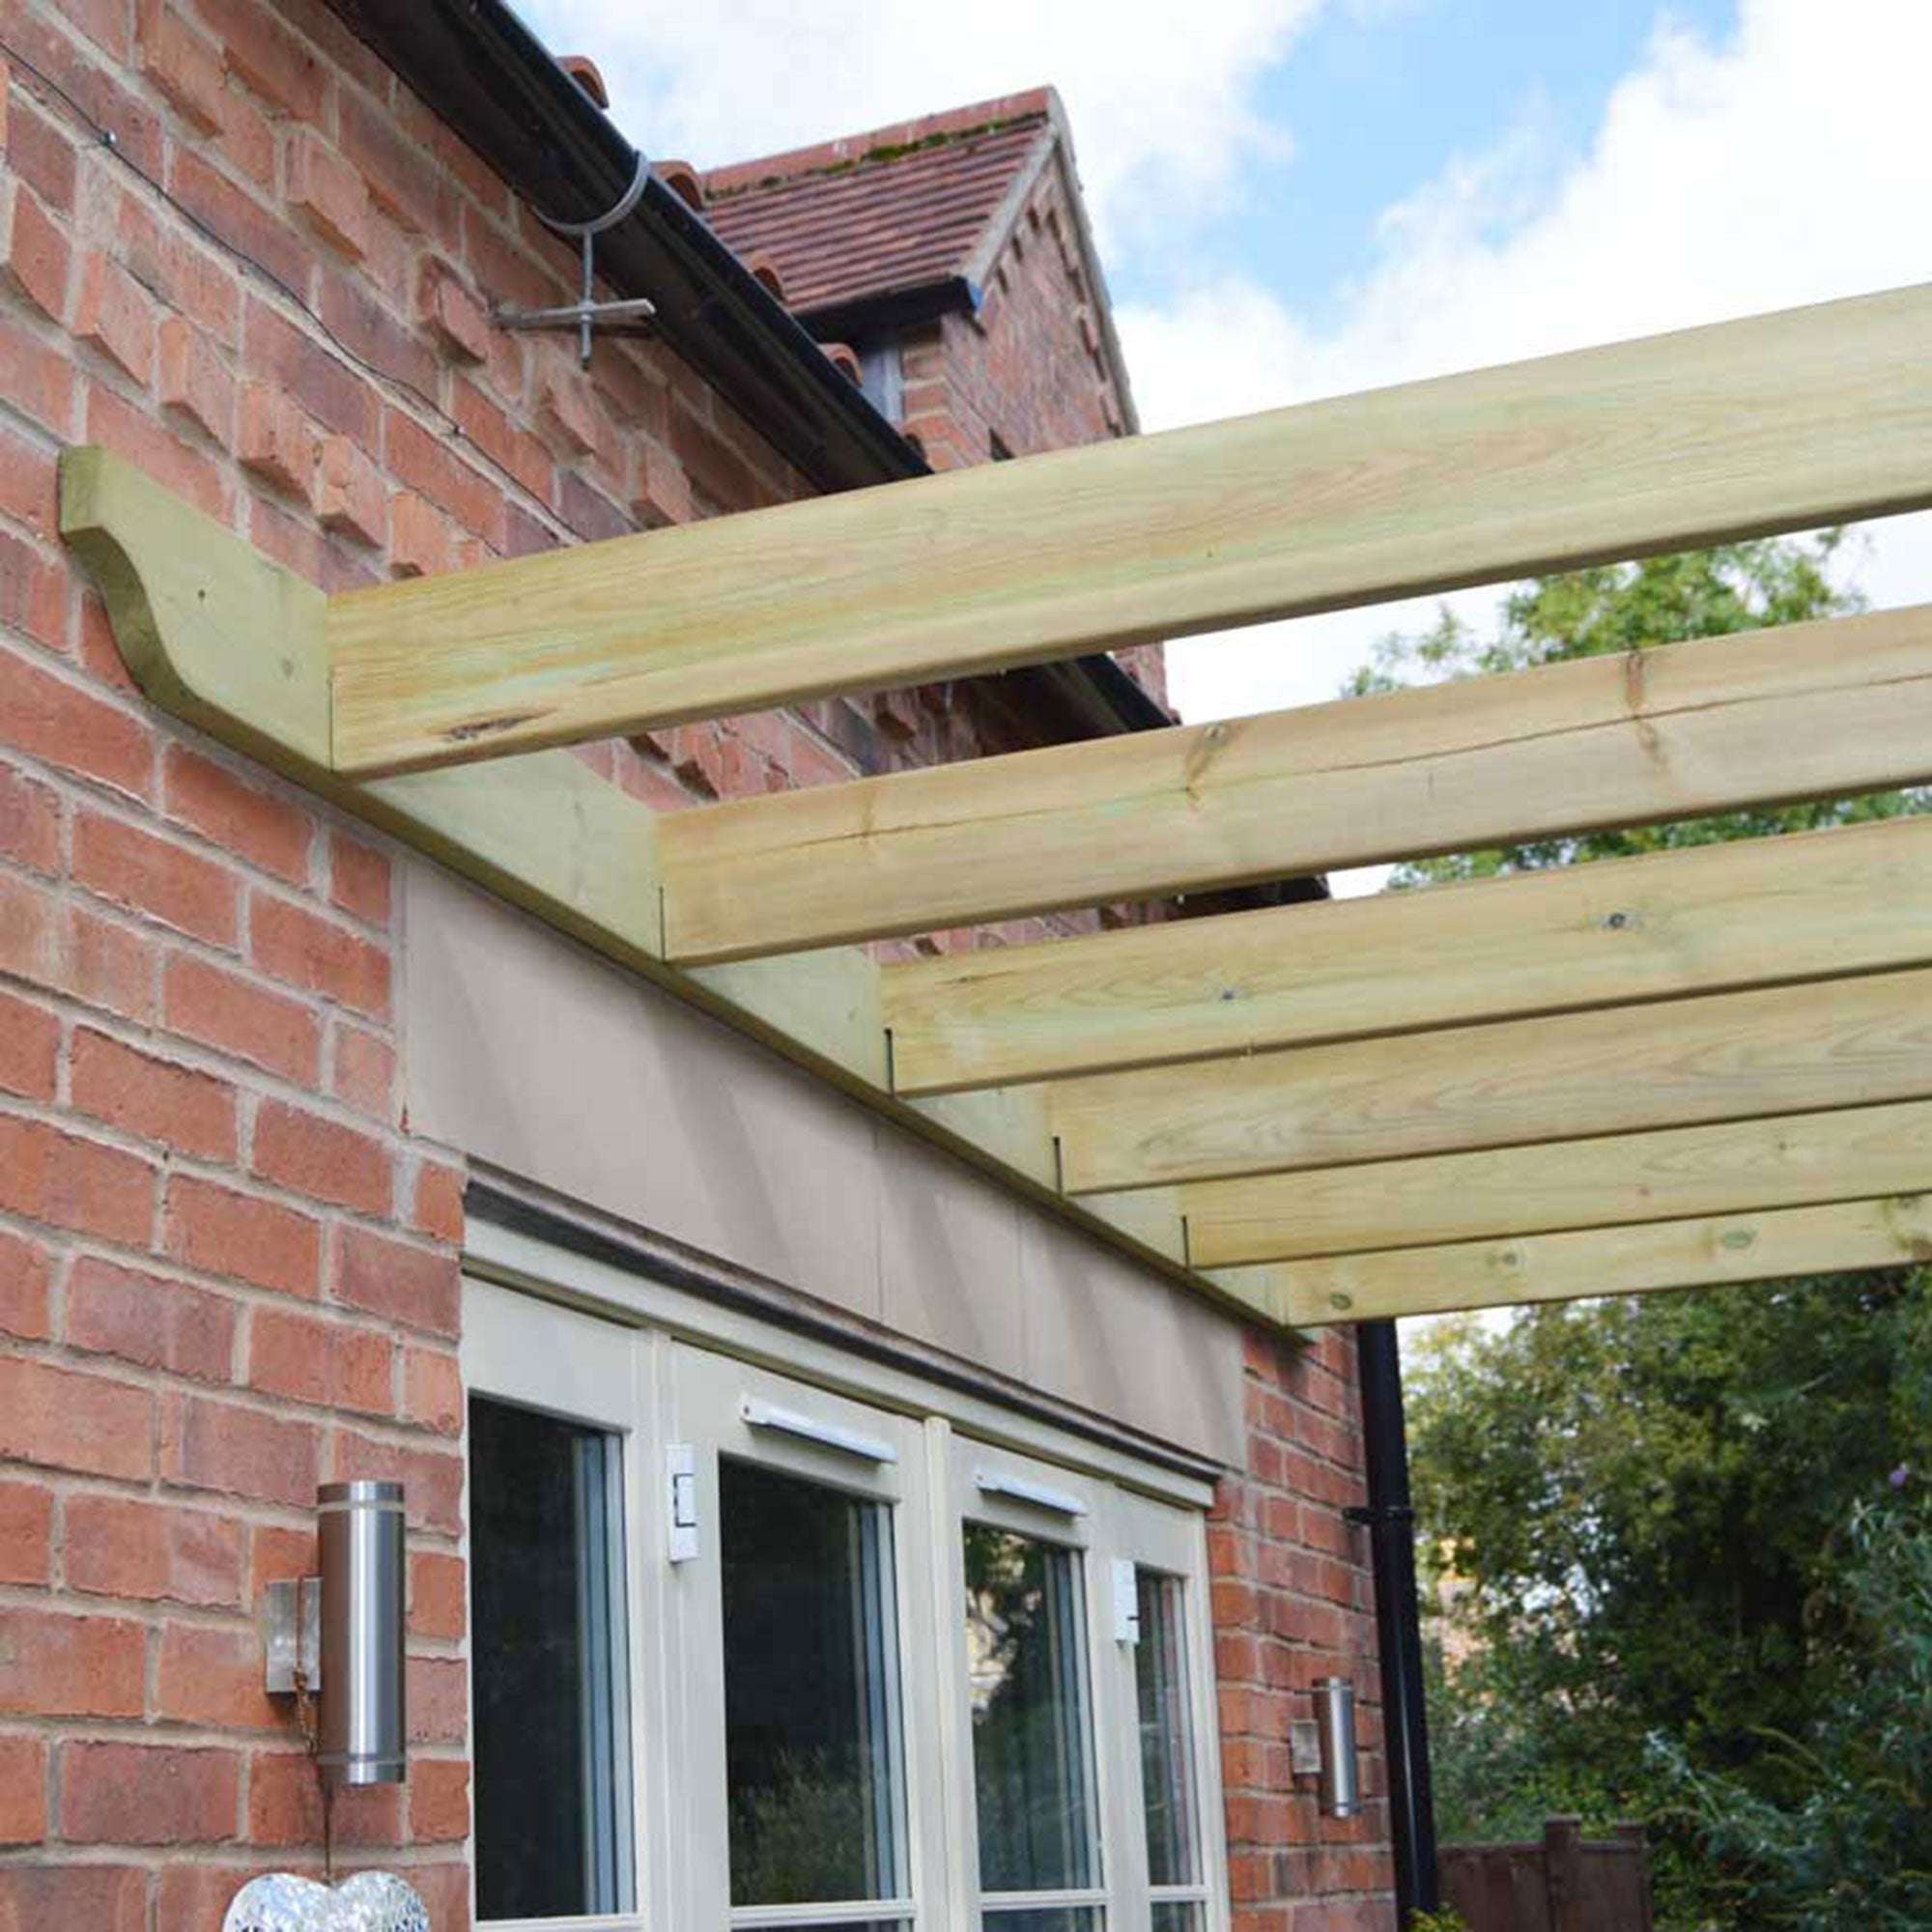 Exceptional Garden:Premium Lean To Pergola with Two Posts